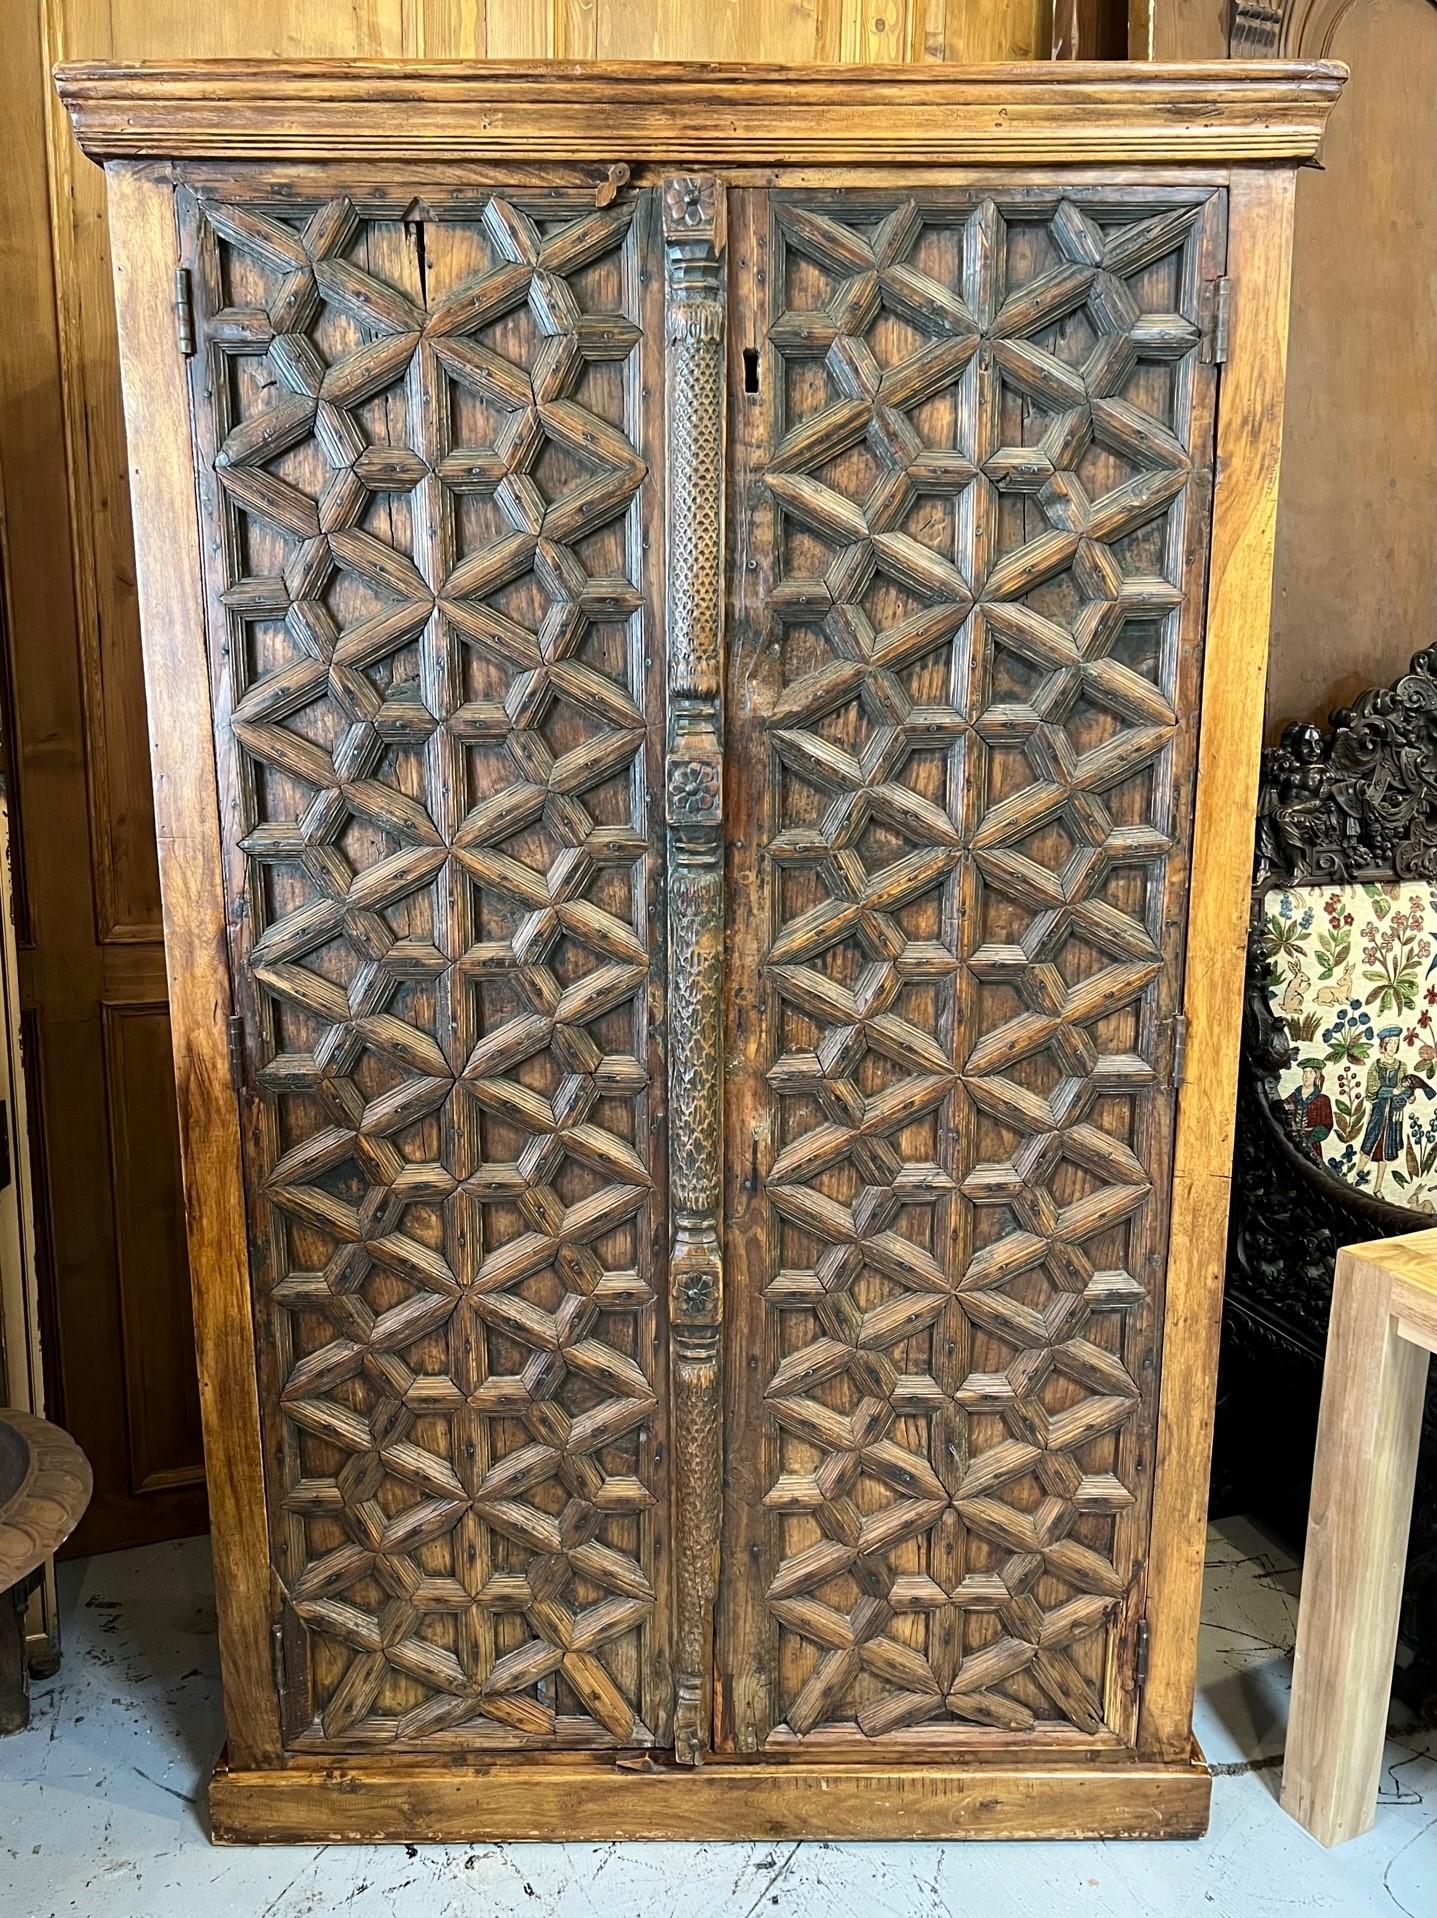 An Indian sheessham wood tall cabinet with antique doors from the late 19th century. The carved doors are just amazing with a beautiful patina that only comes with age. The double doors open with a latch on top and inside are three shelves very